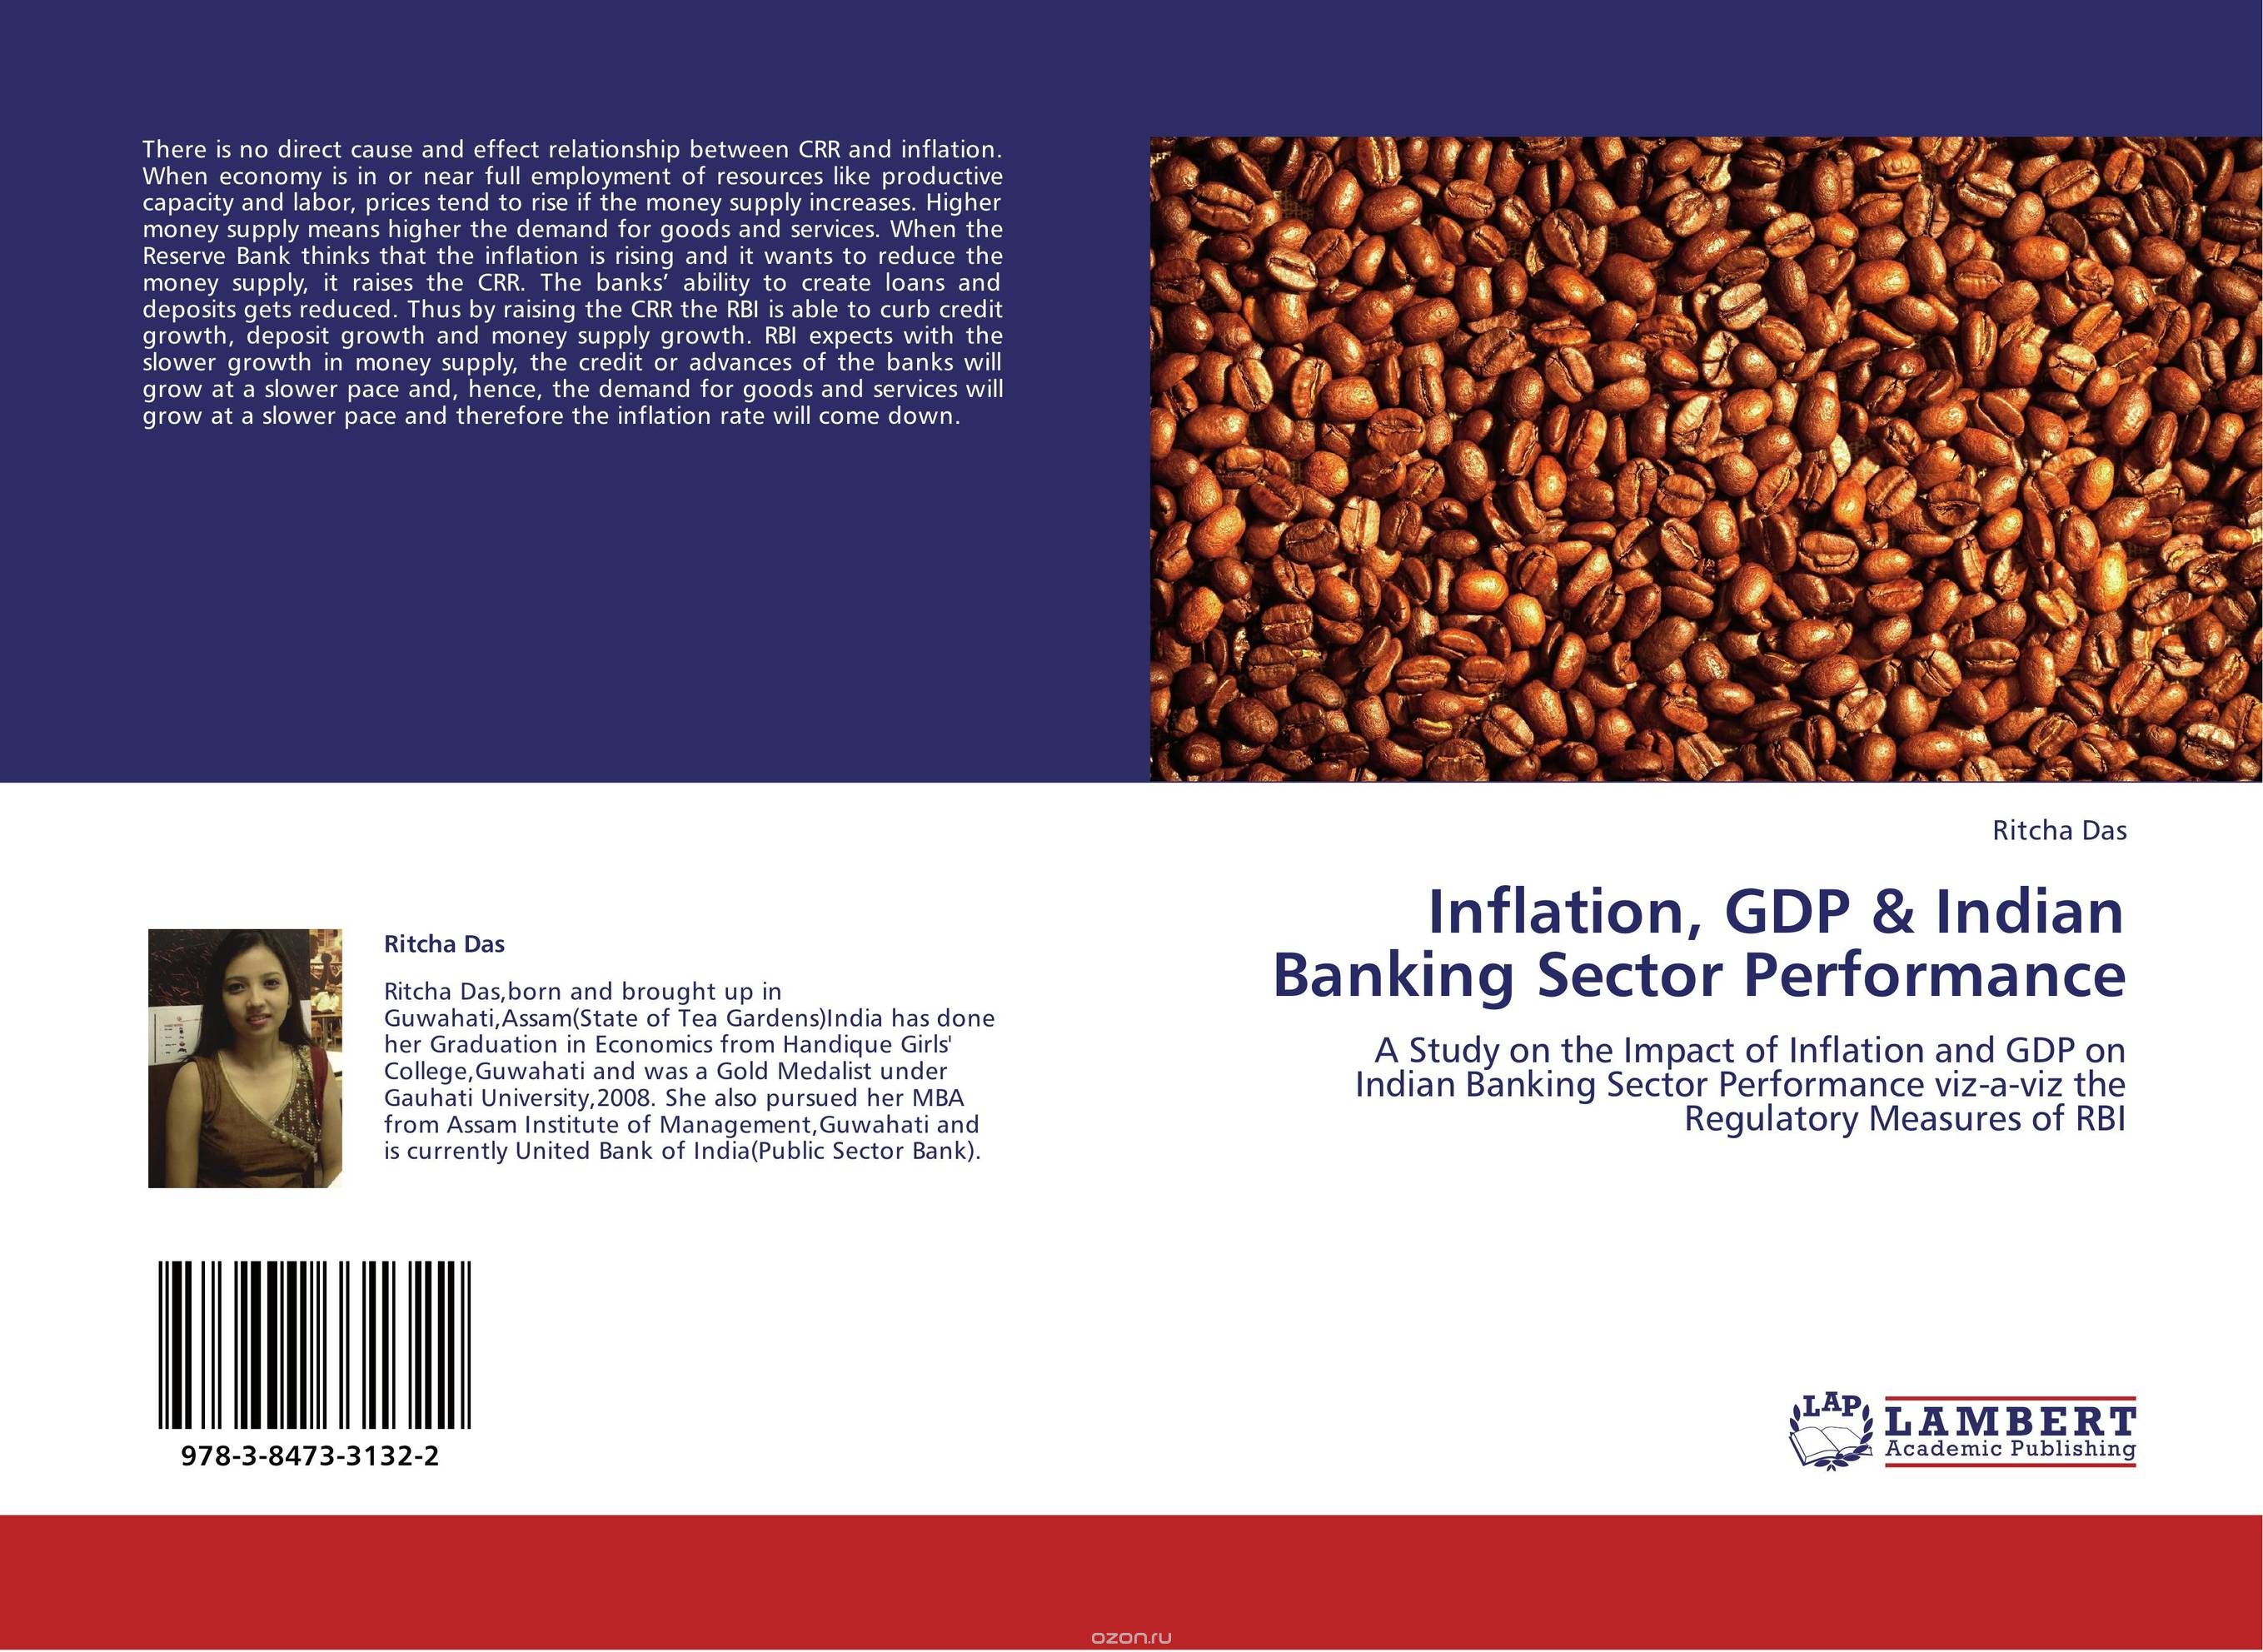 Inflation, GDP & Indian Banking Sector Performance